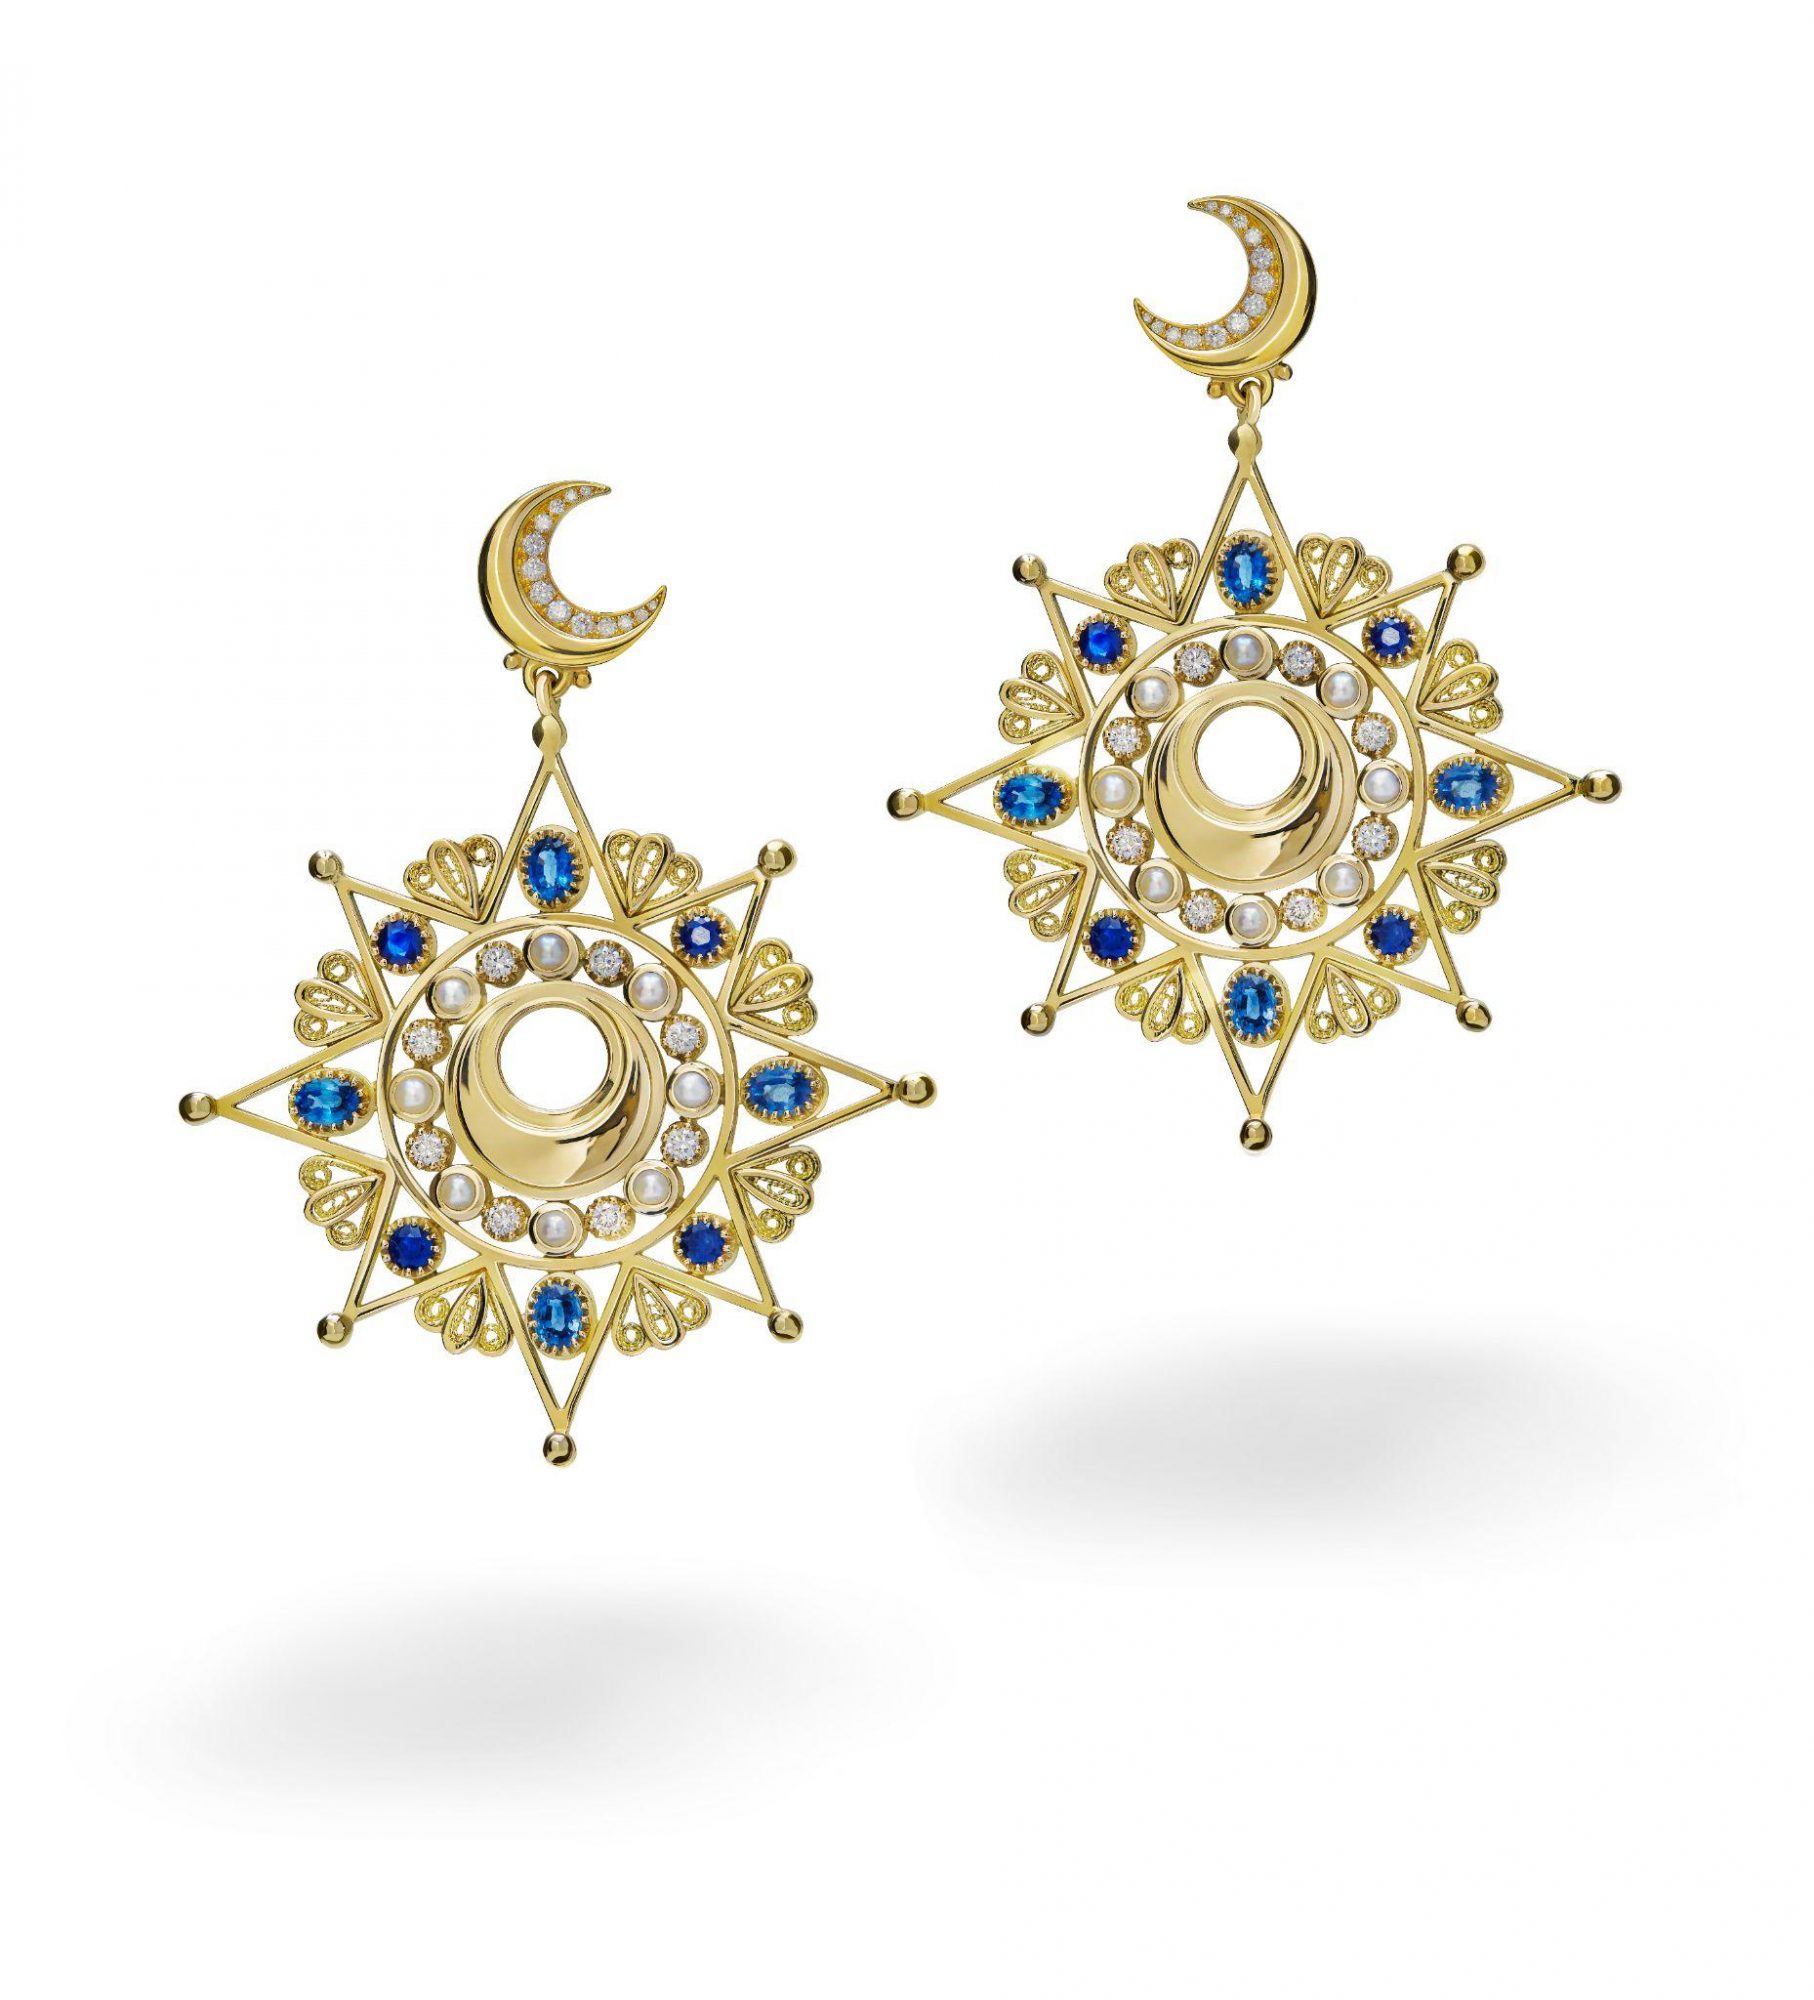 Azza Fahmy unveils an enthralling collection, ‘Wonders of Nature Reimagined’